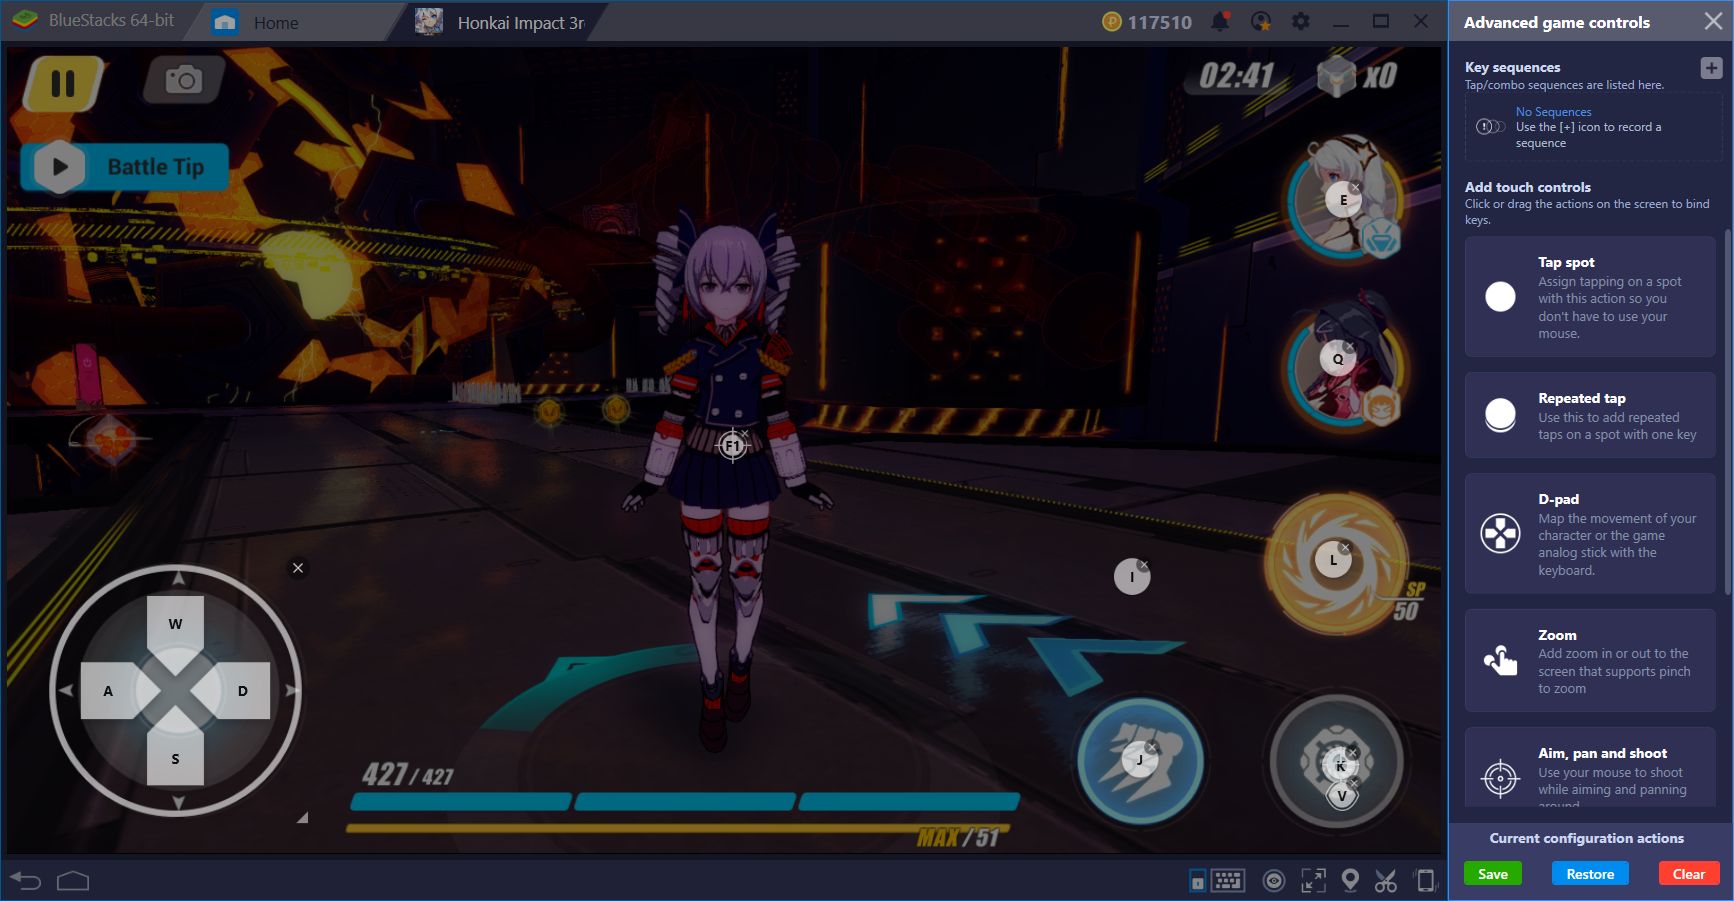 Honkai Impact 3rd on BlueStacks—Optimize Your Performance with our Tools